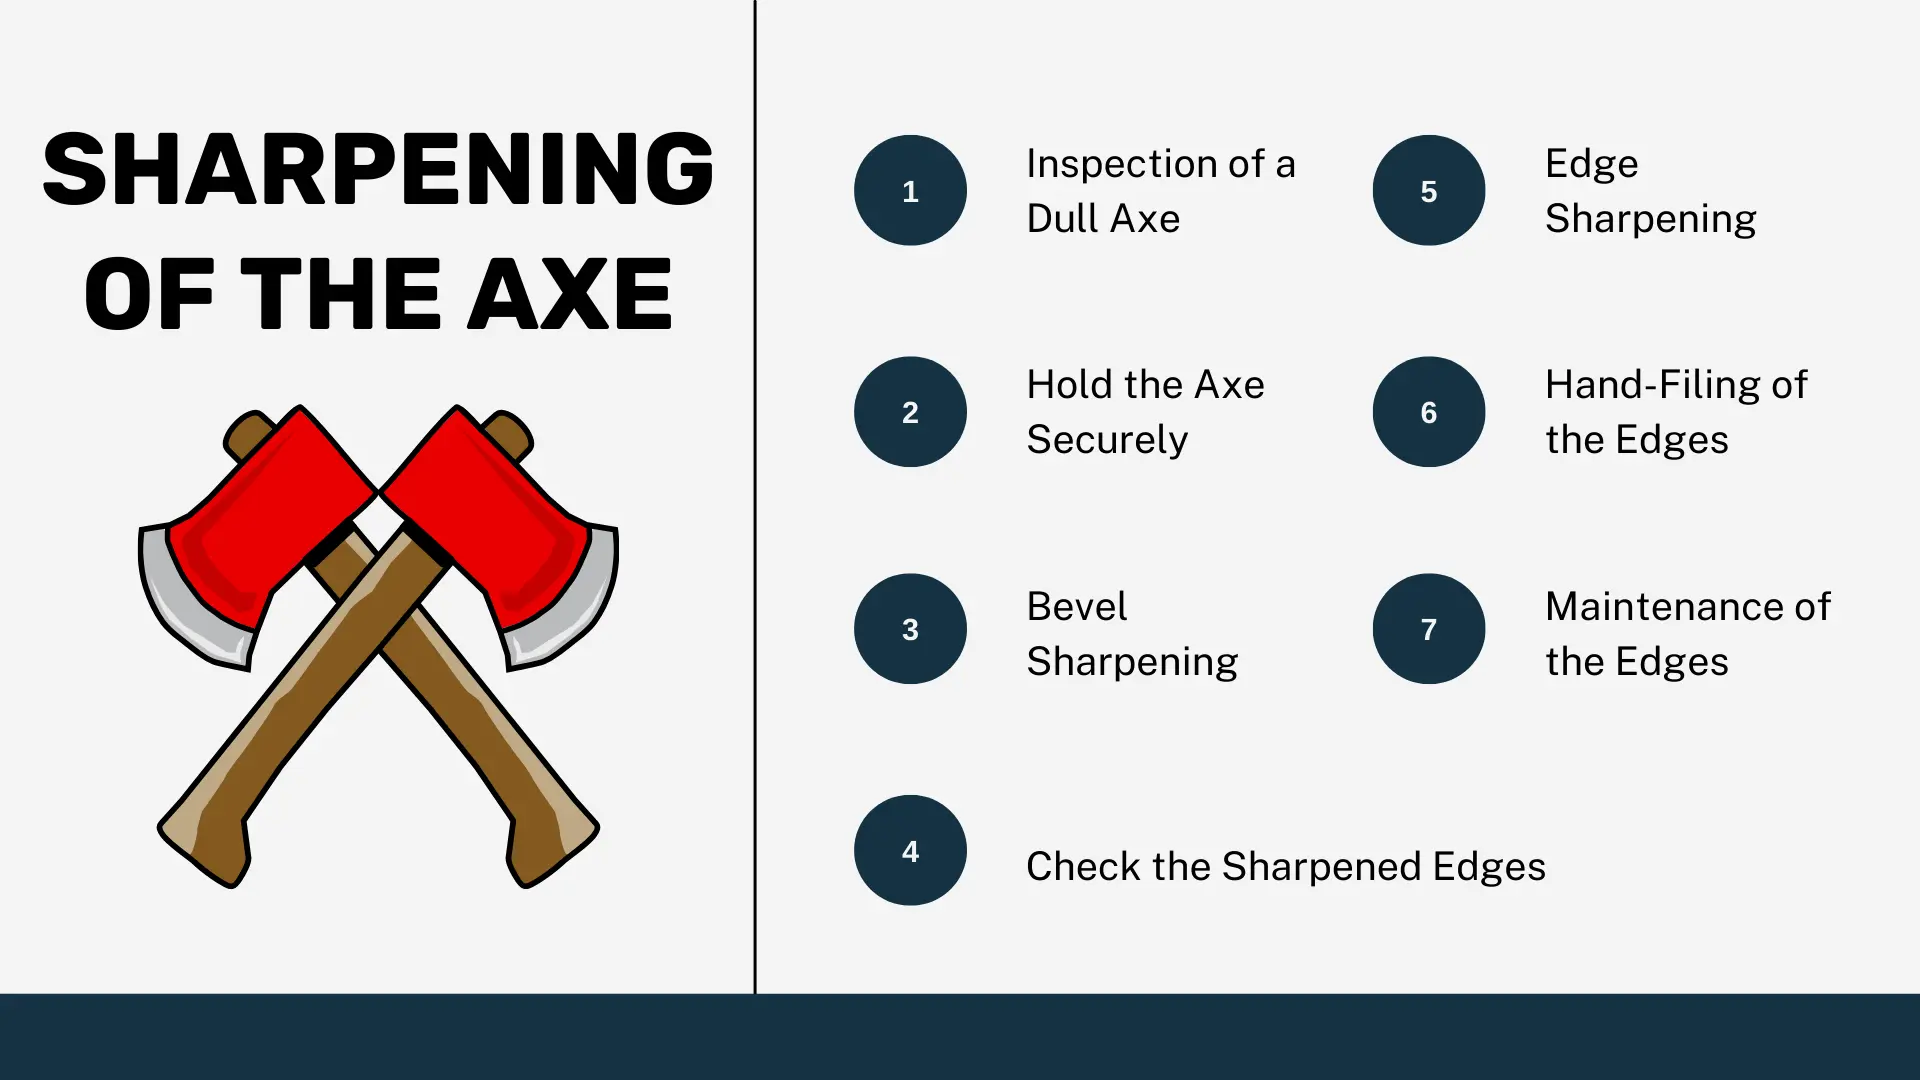 Steps to Sharpen the Axe